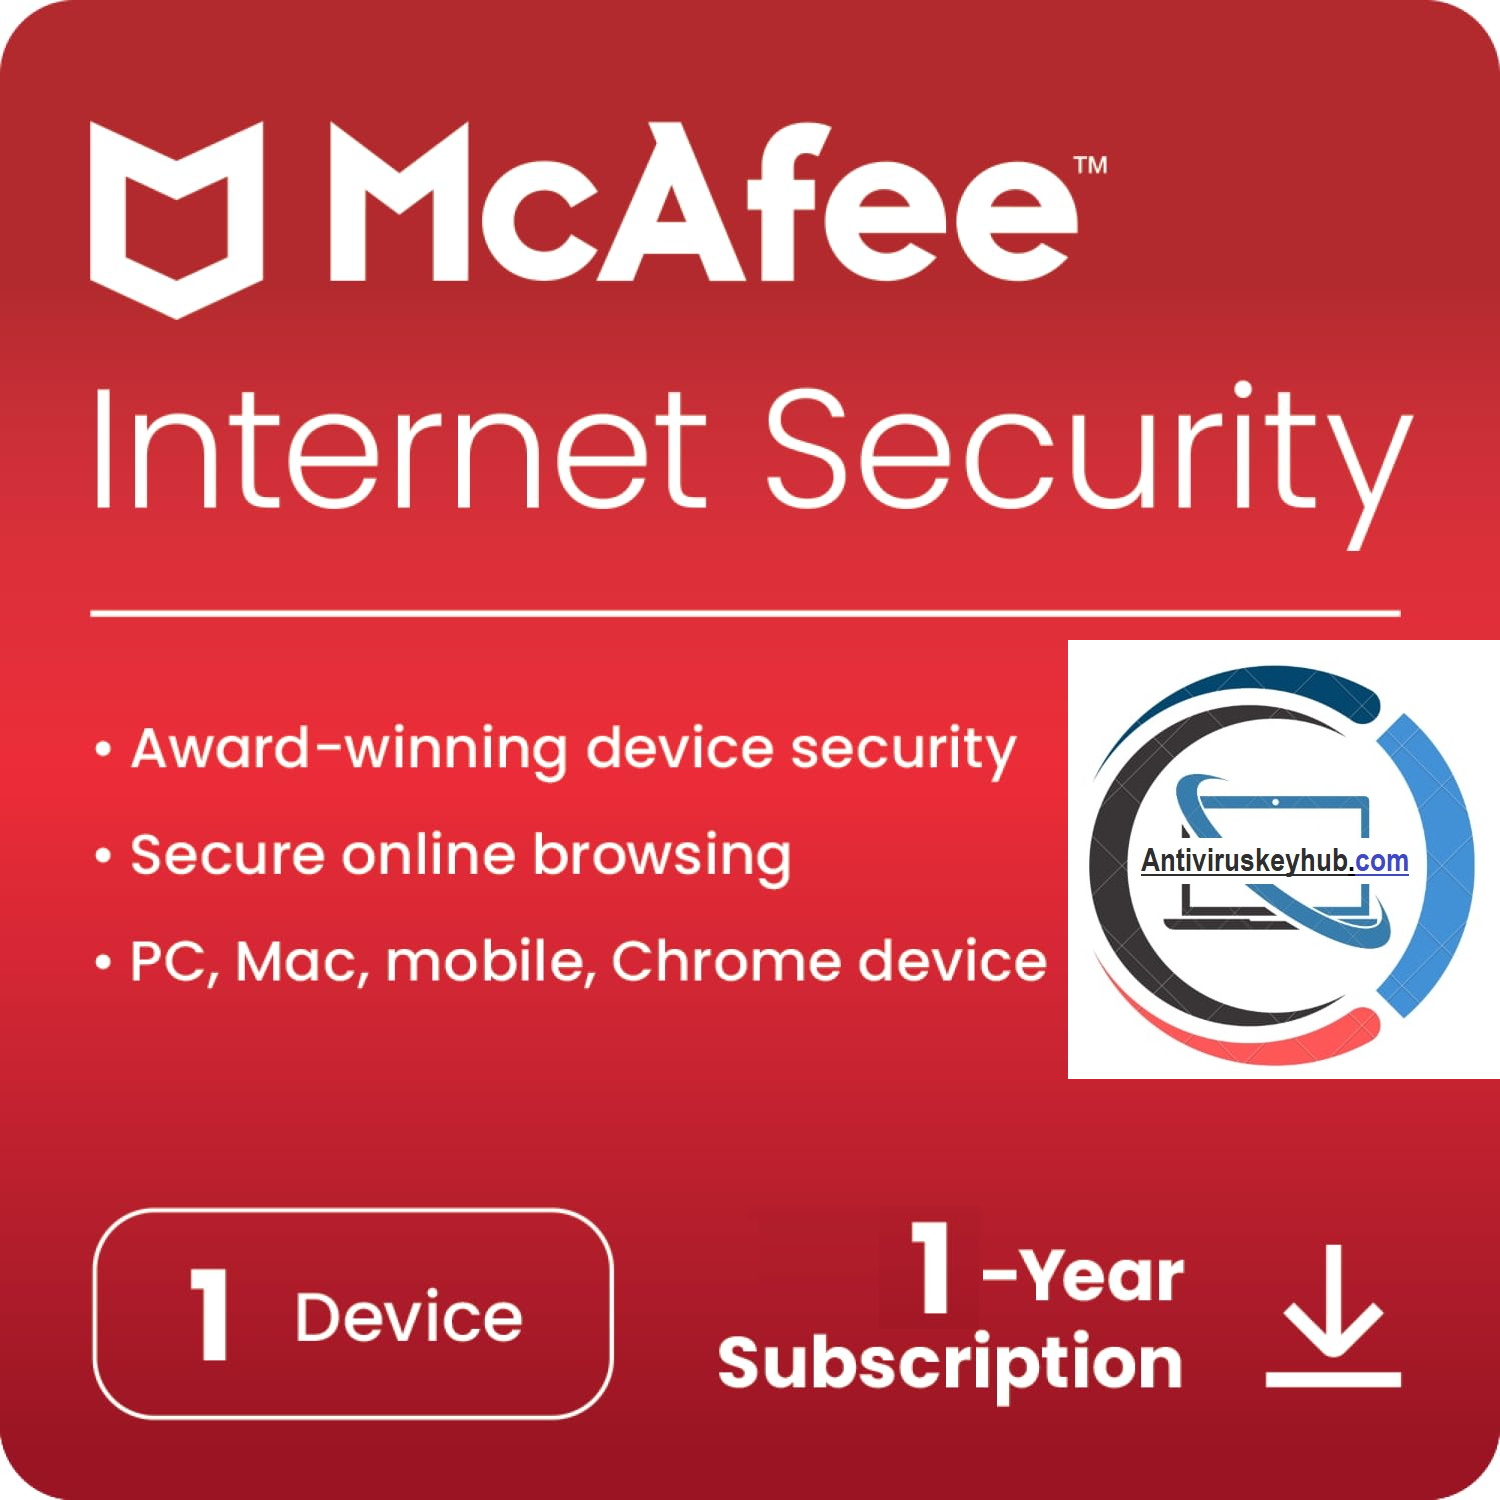 mcafee is 3yr